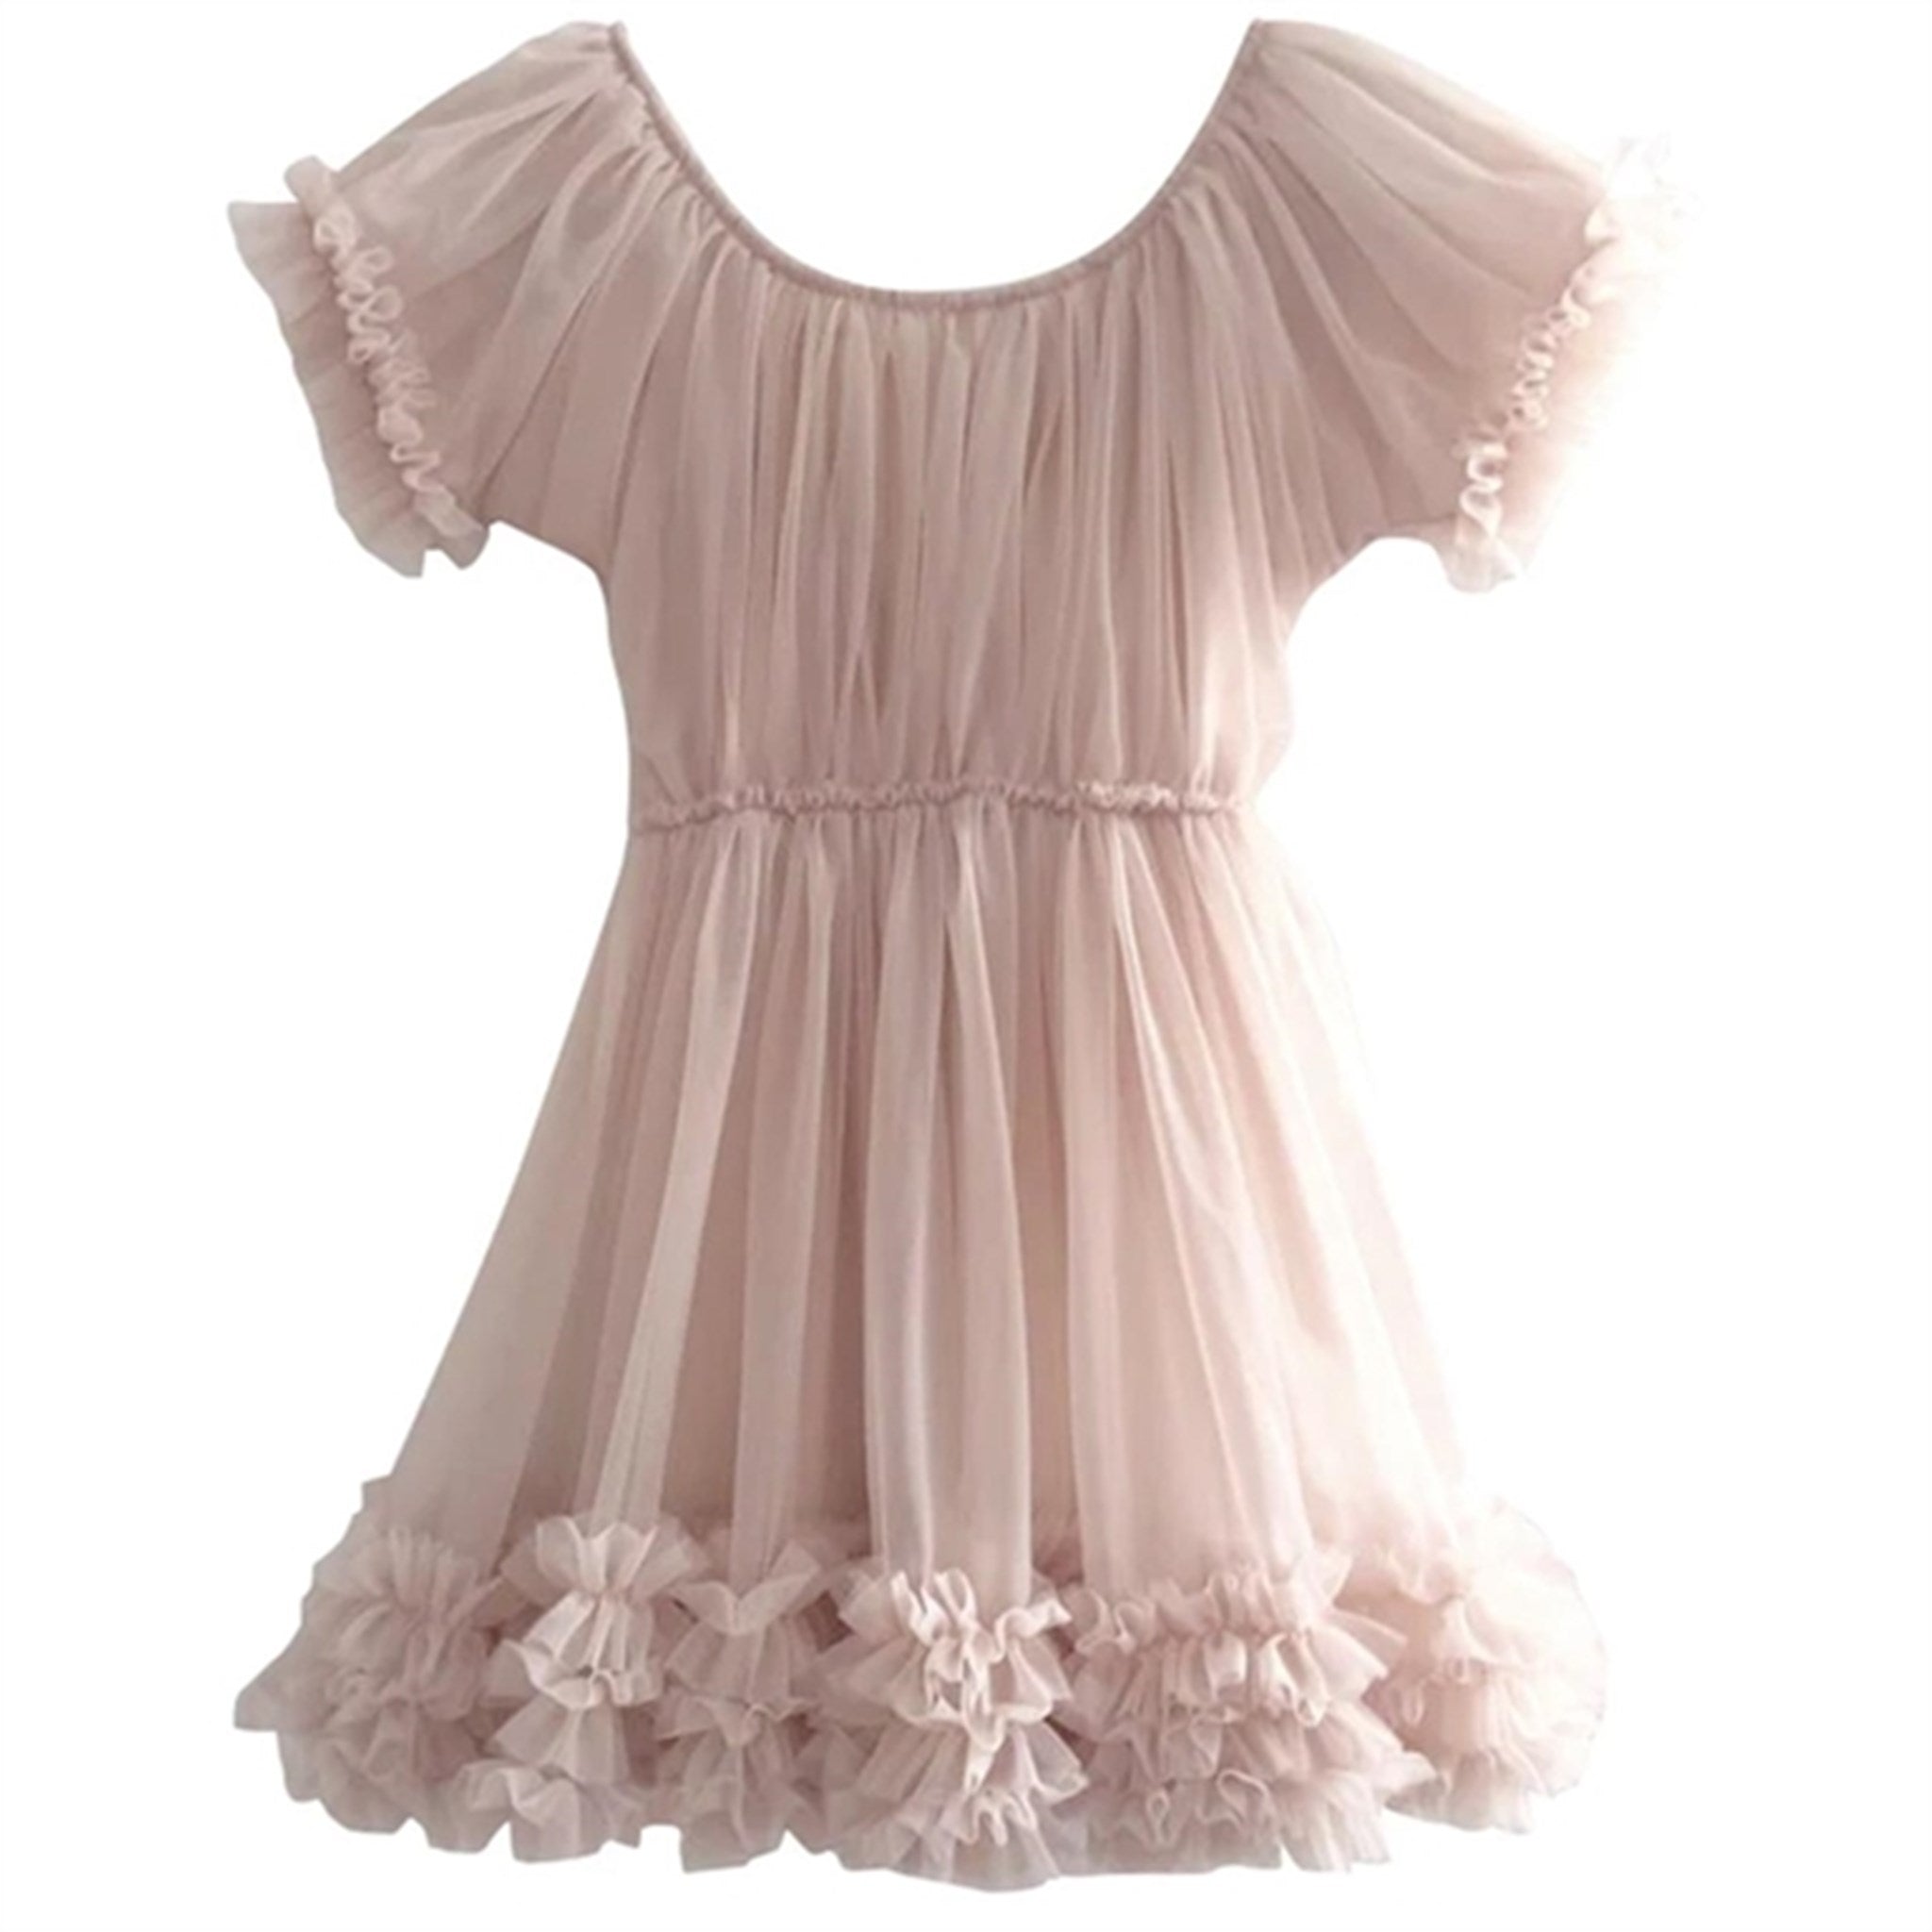 Dolly by Le Petit Frilly Kjole Ballet Pink